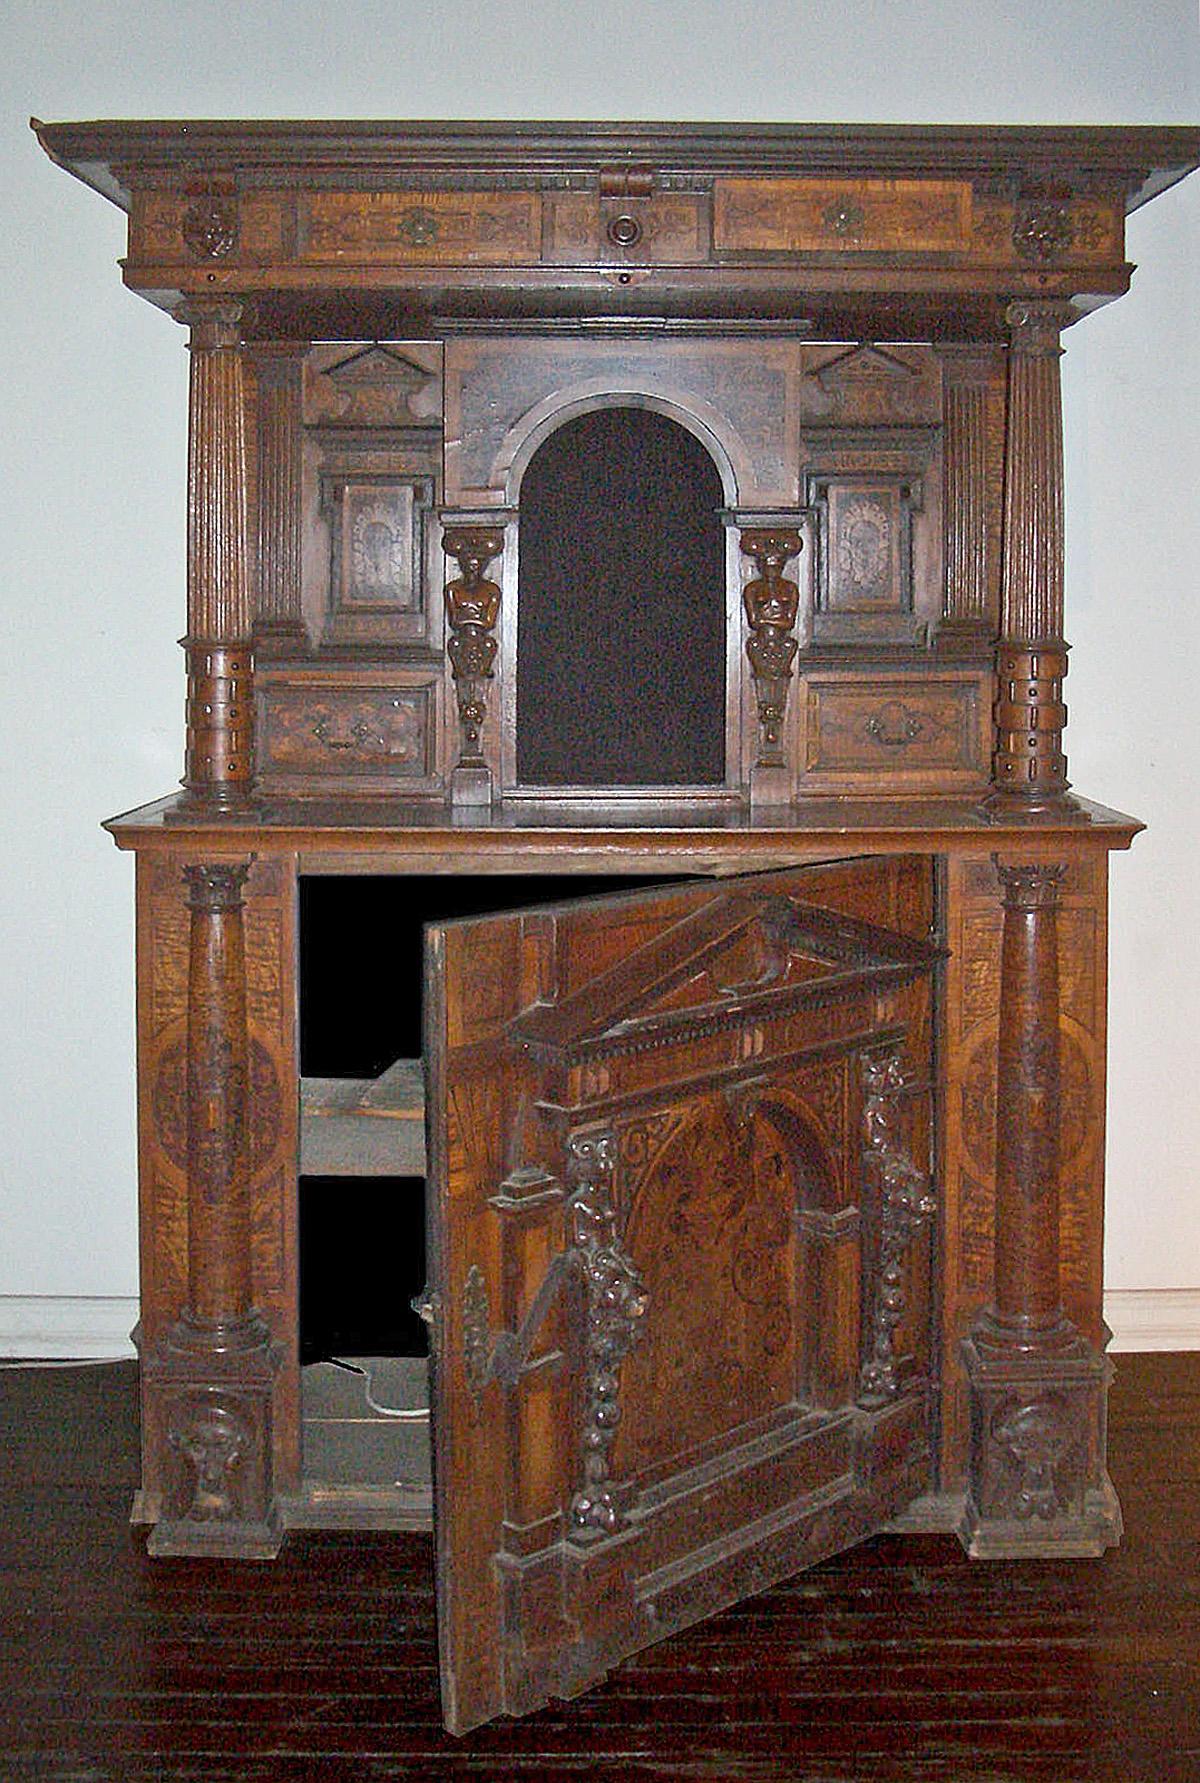 Carved German or Swiss Late Renaissance / Baroque 17th Century Inlaid Buffet Cabinet For Sale